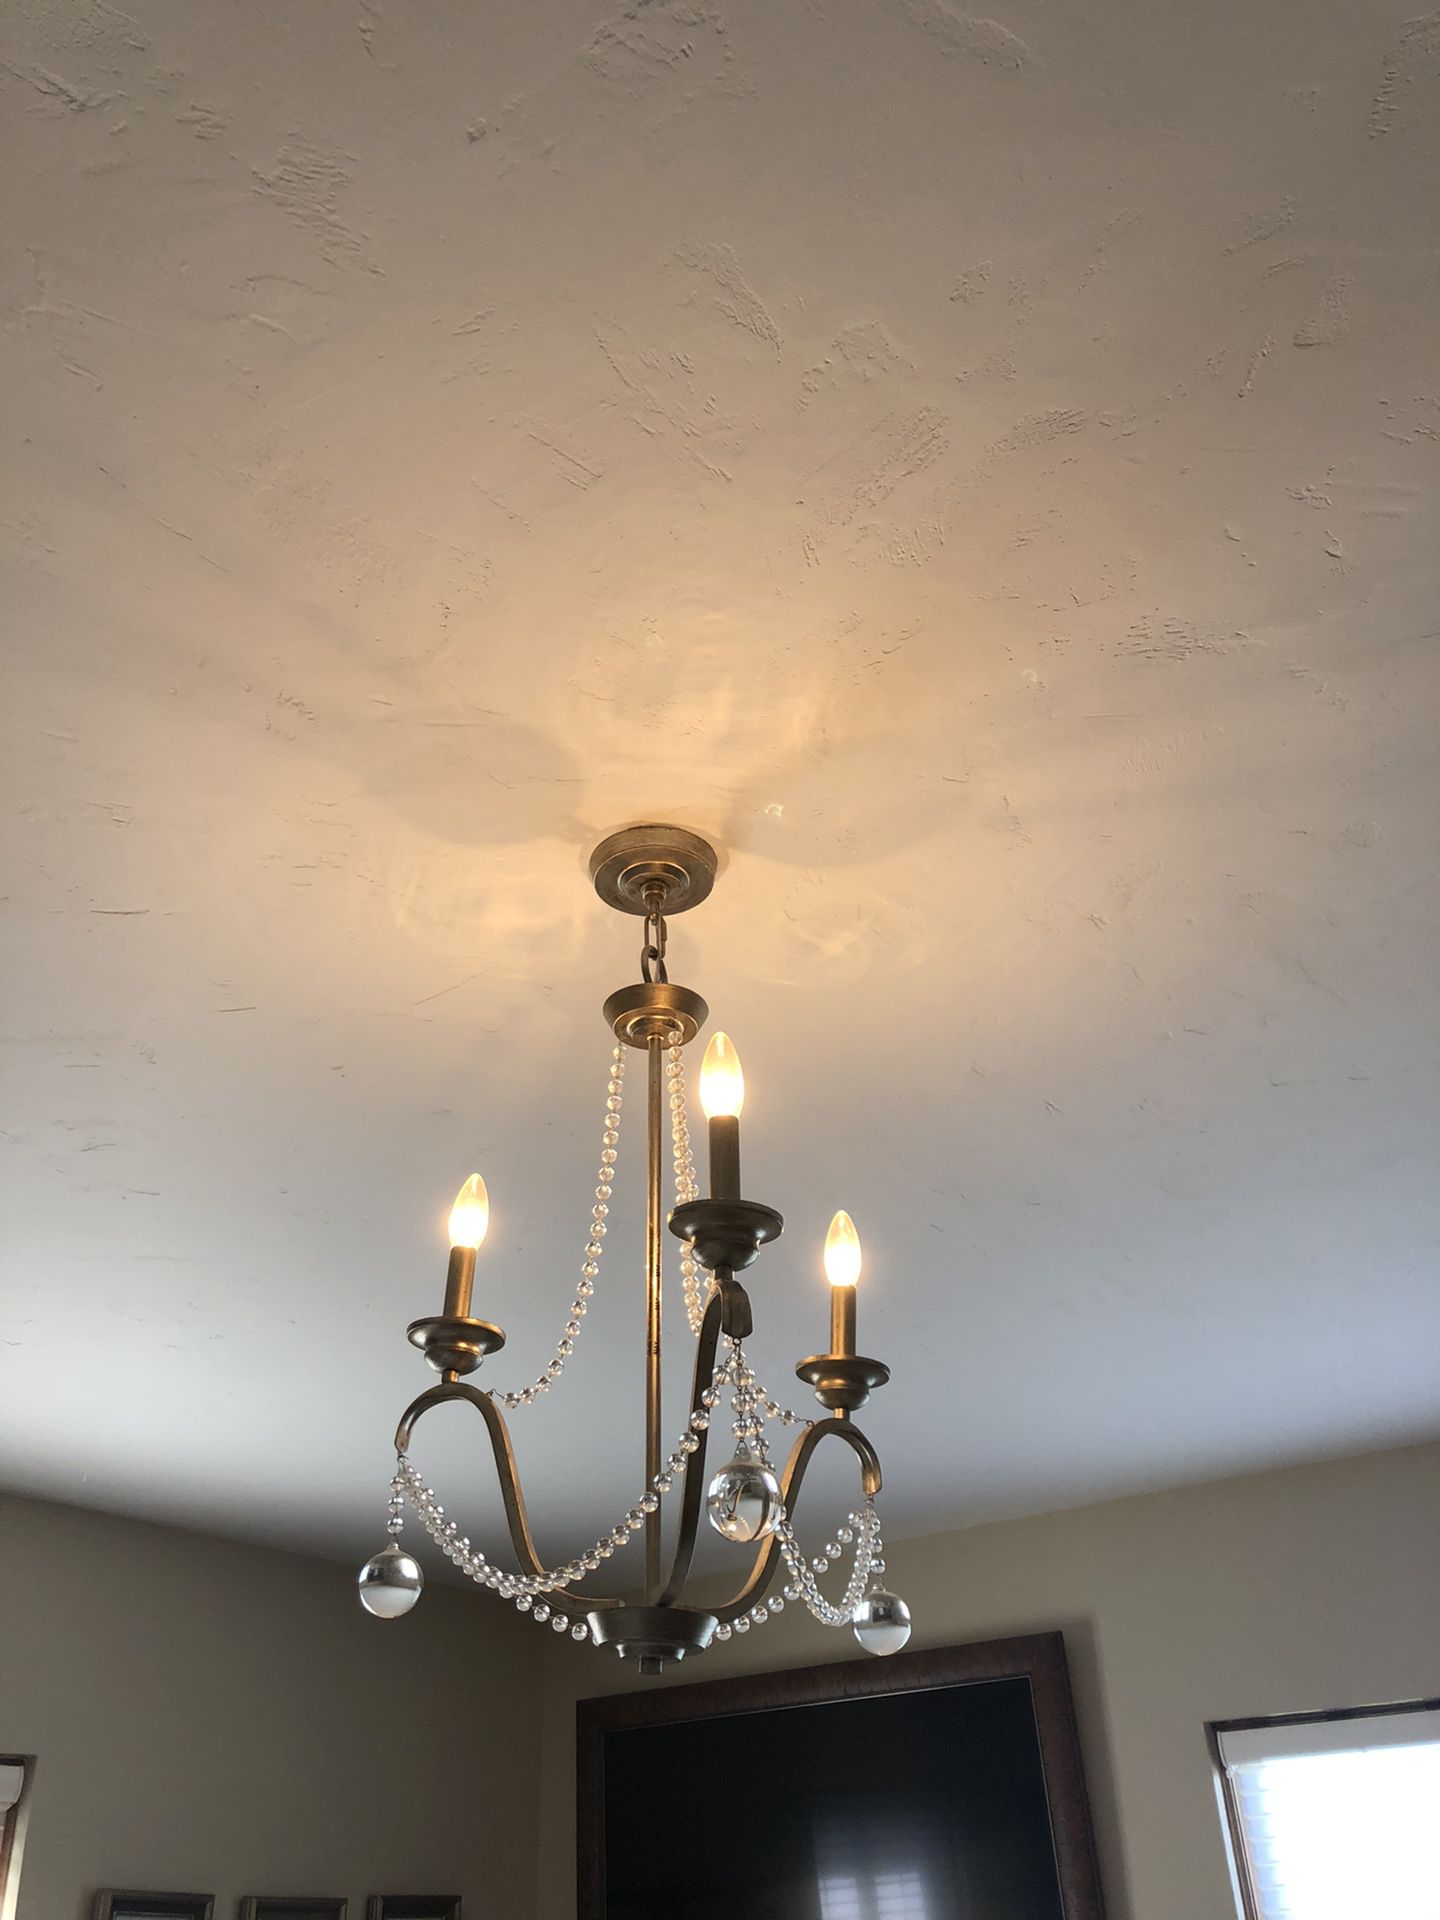 Small chandelier